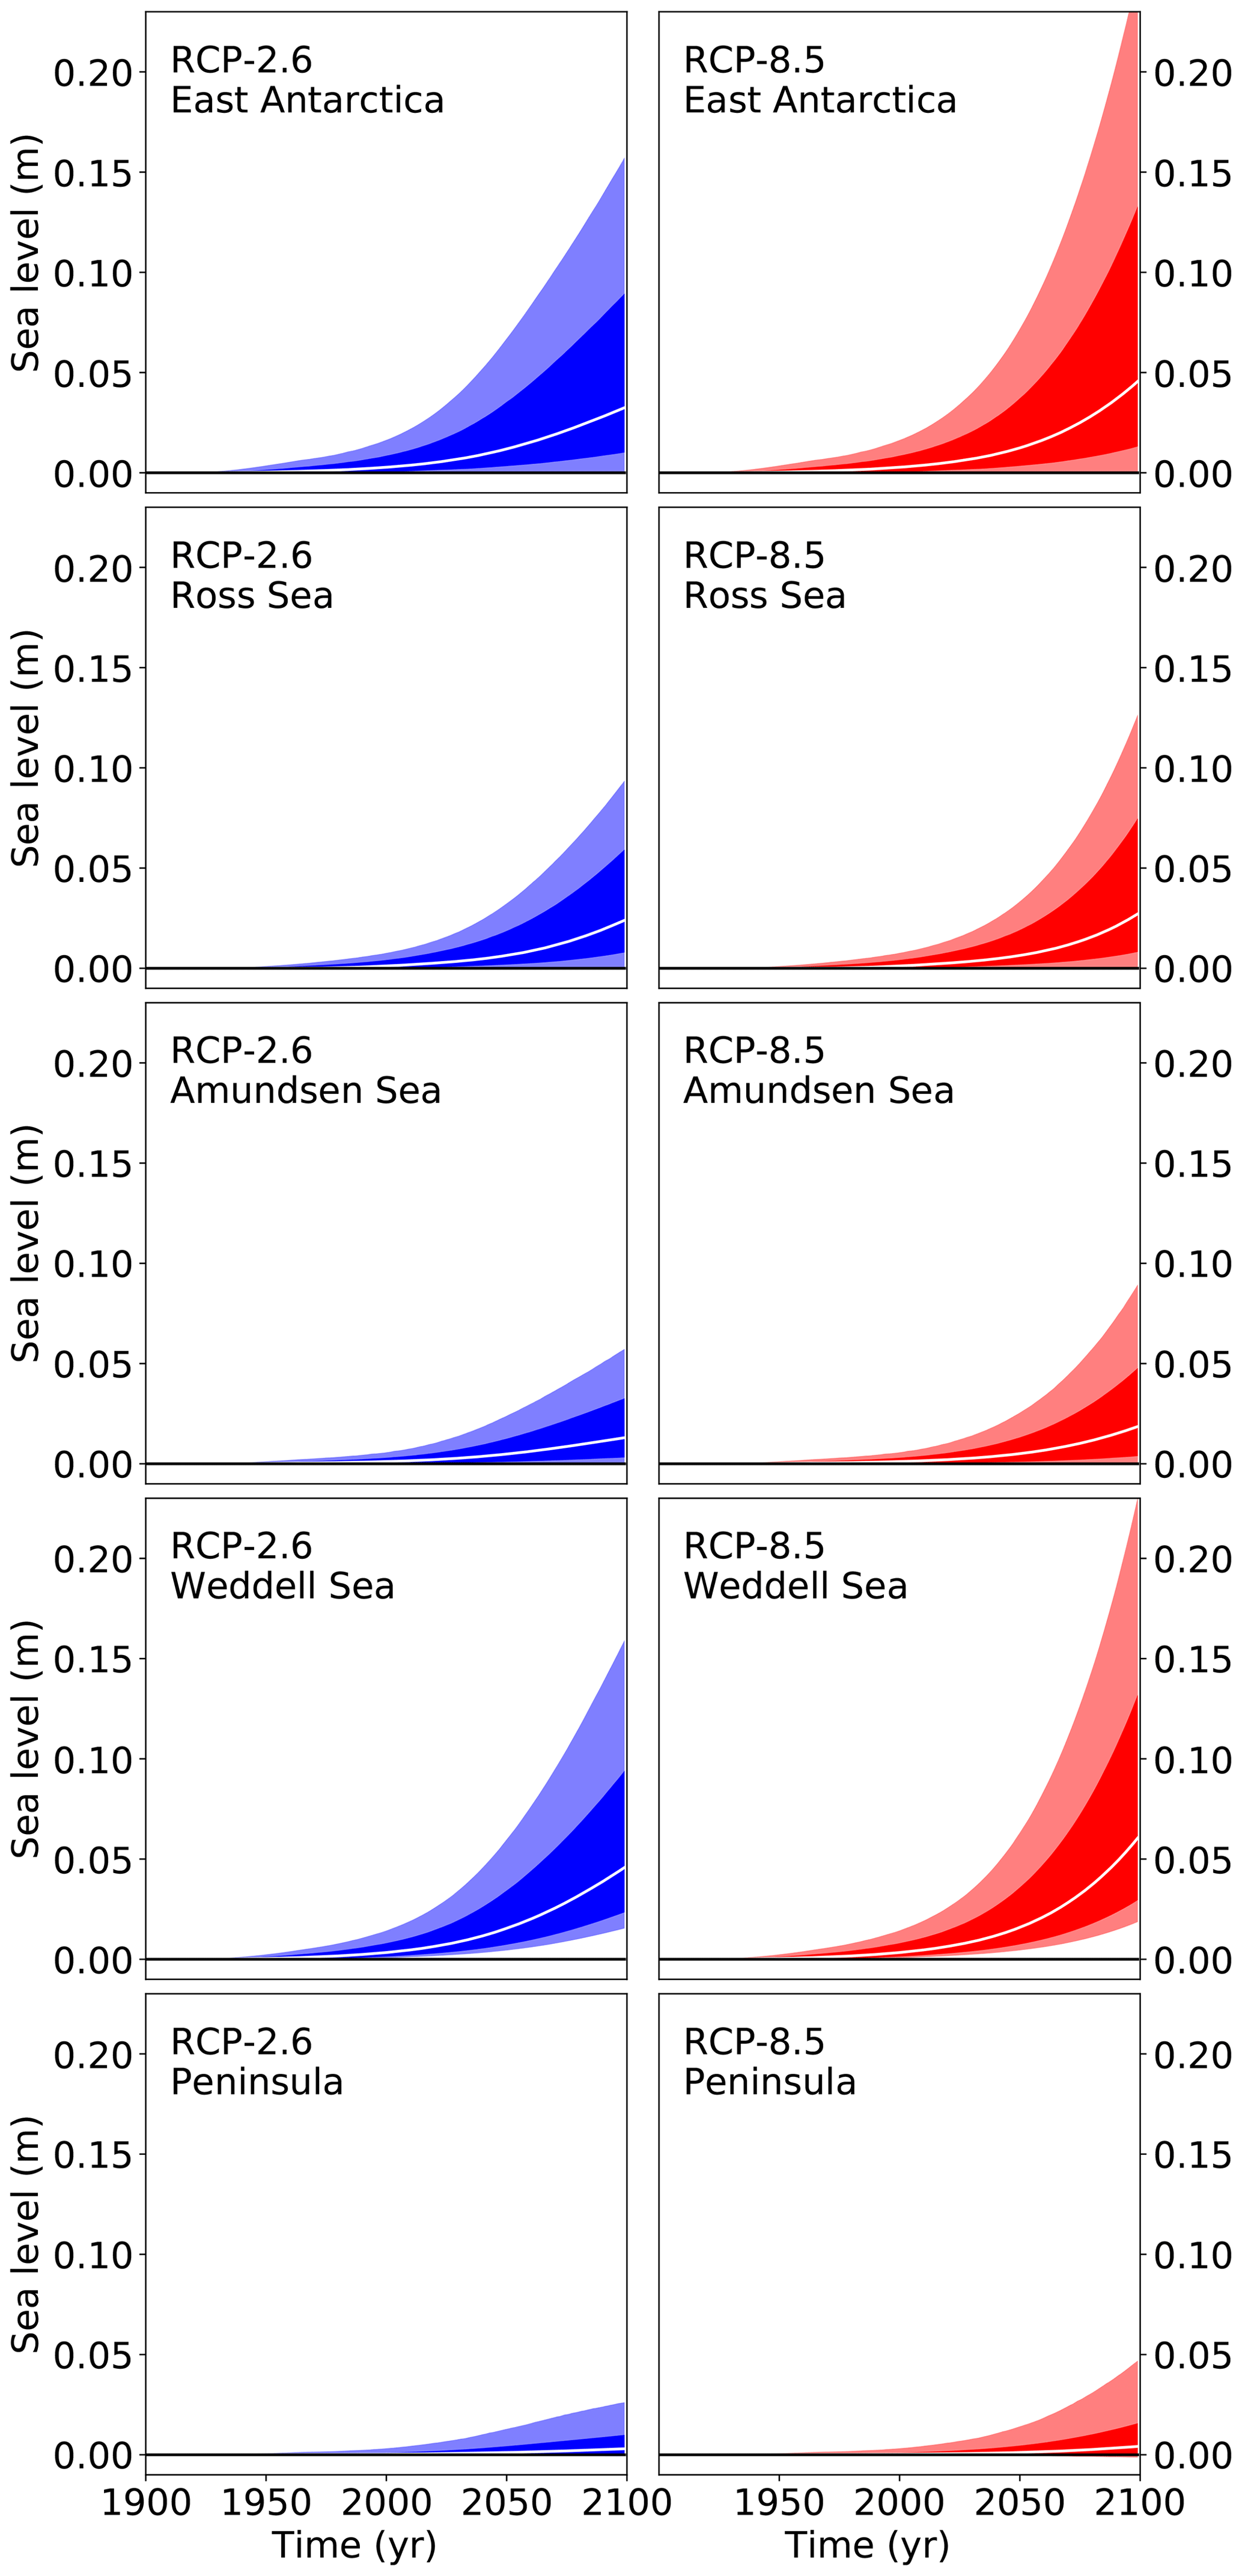 Esd Projecting Antarctica S Contribution To Future Sea Level Rise From Basal Ice Shelf Melt Using Linear Response Functions Of 16 Ice Sheet Models Larmip 2